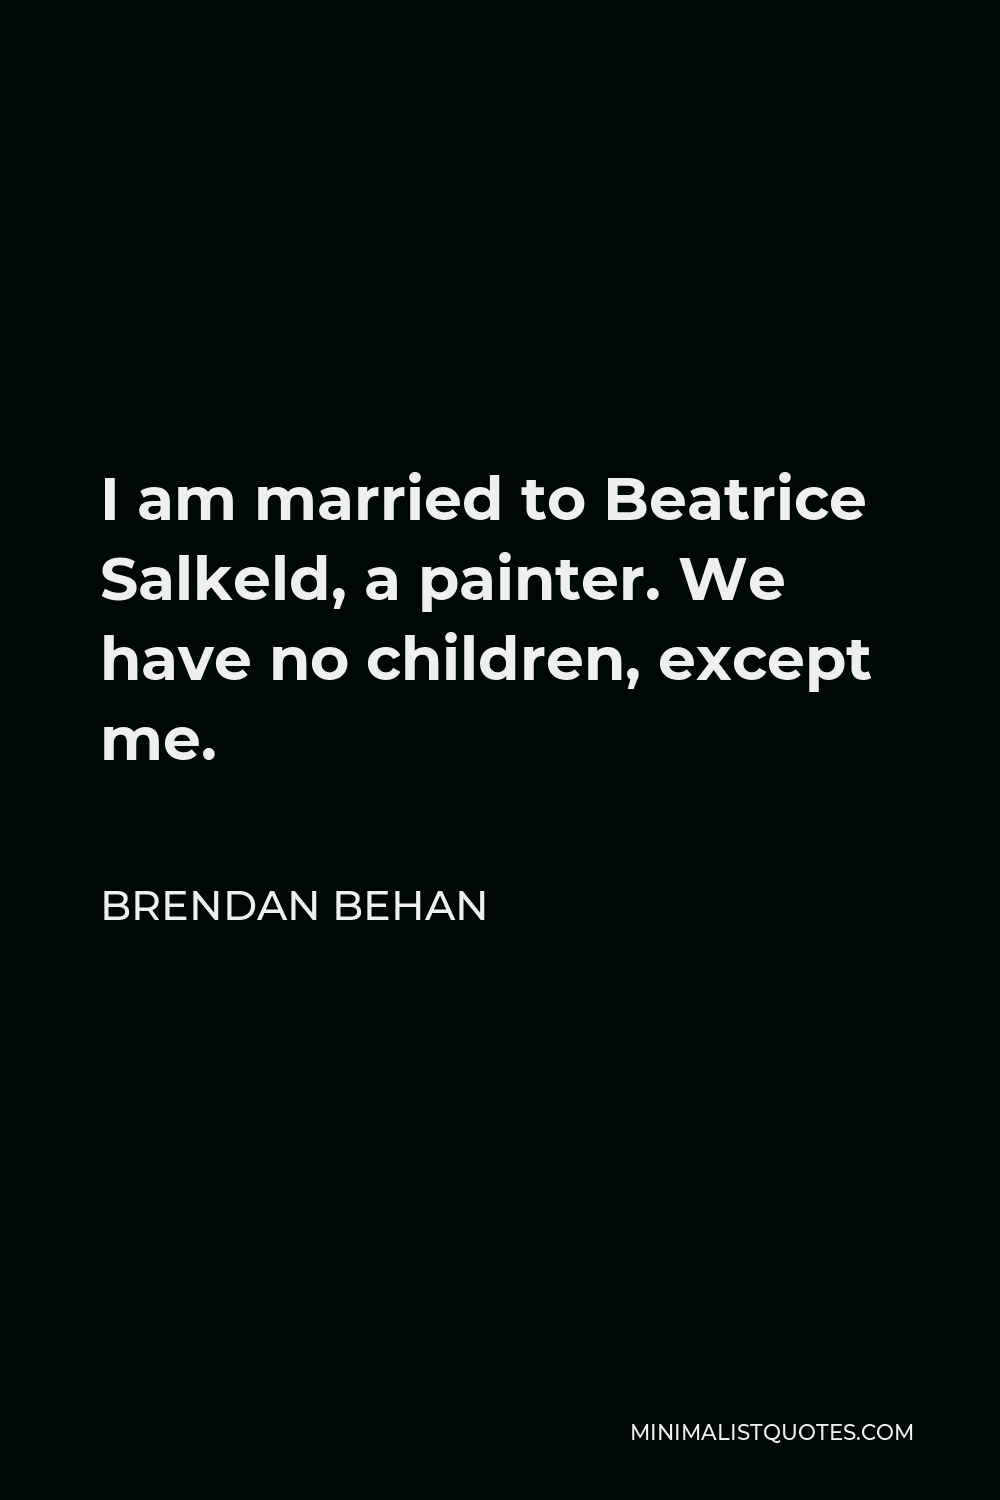 Brendan Behan Quote - I am married to Beatrice Salkeld, a painter. We have no children, except me.